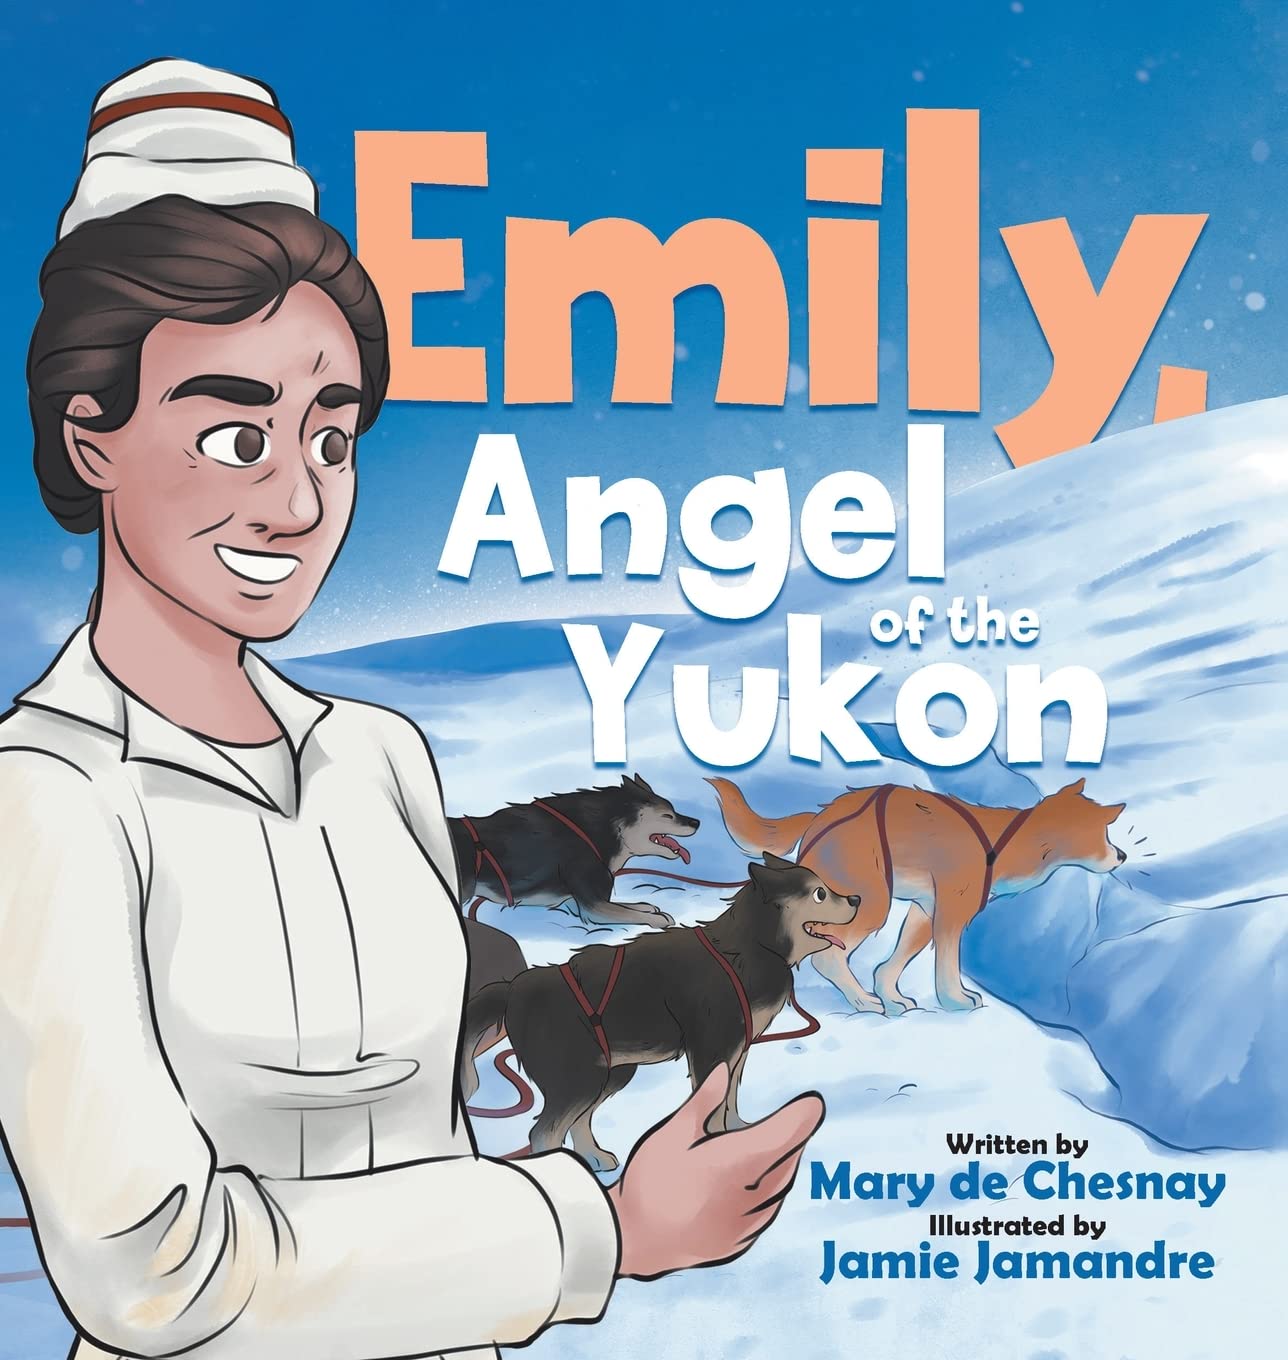 Just in Time for the 52nd Annual Iditarod Trail Sled Dog Race, Mary de Chesnay Promotes Her Children’s Book - Emily, Angel of the Yukon